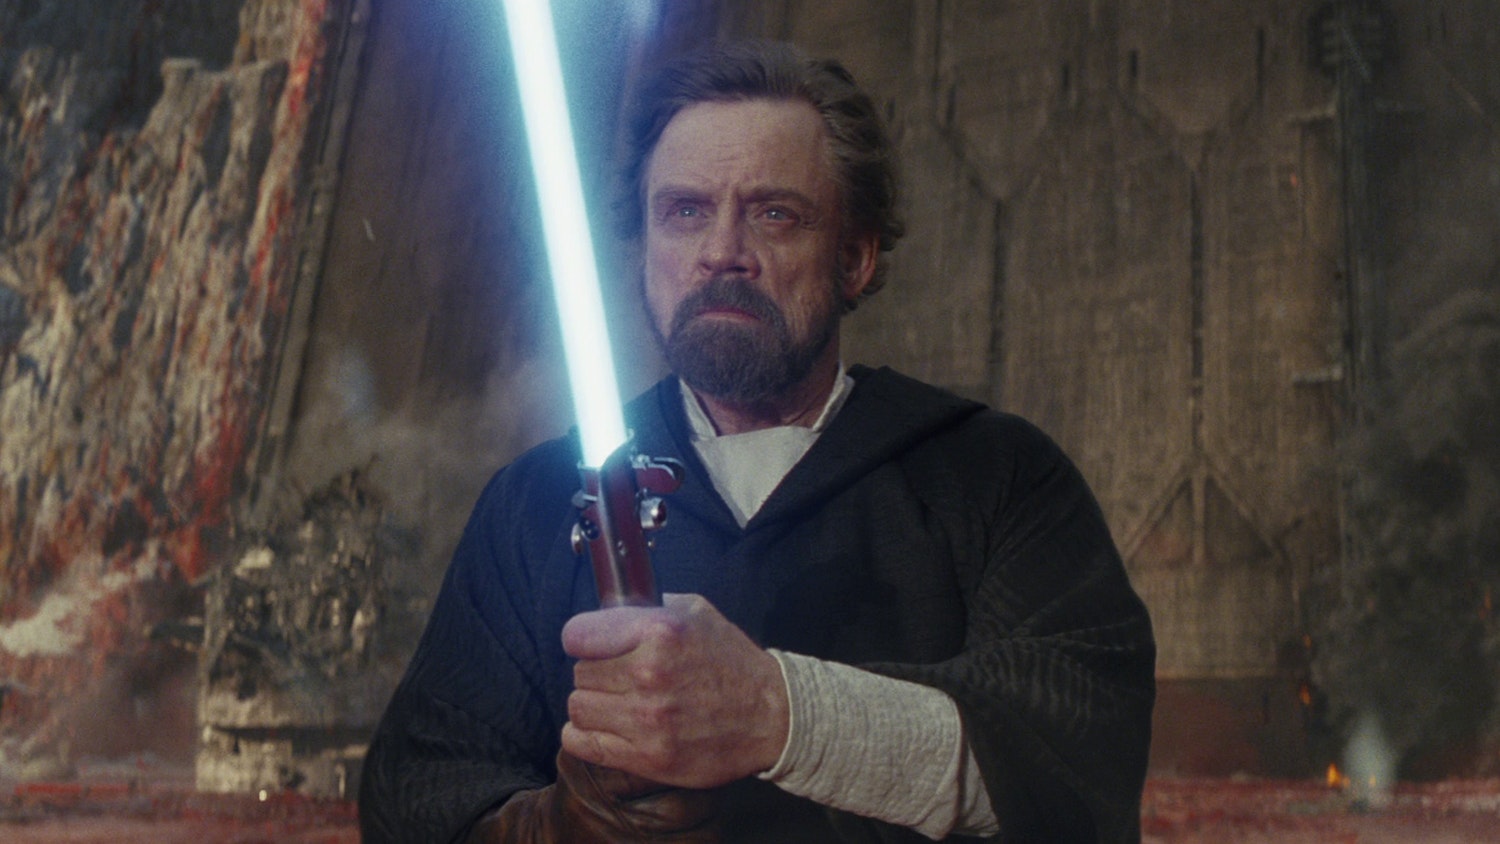 Review: 'The Last Jedi' Is 'The Dark Knight' Of The 'Star Wars' Saga